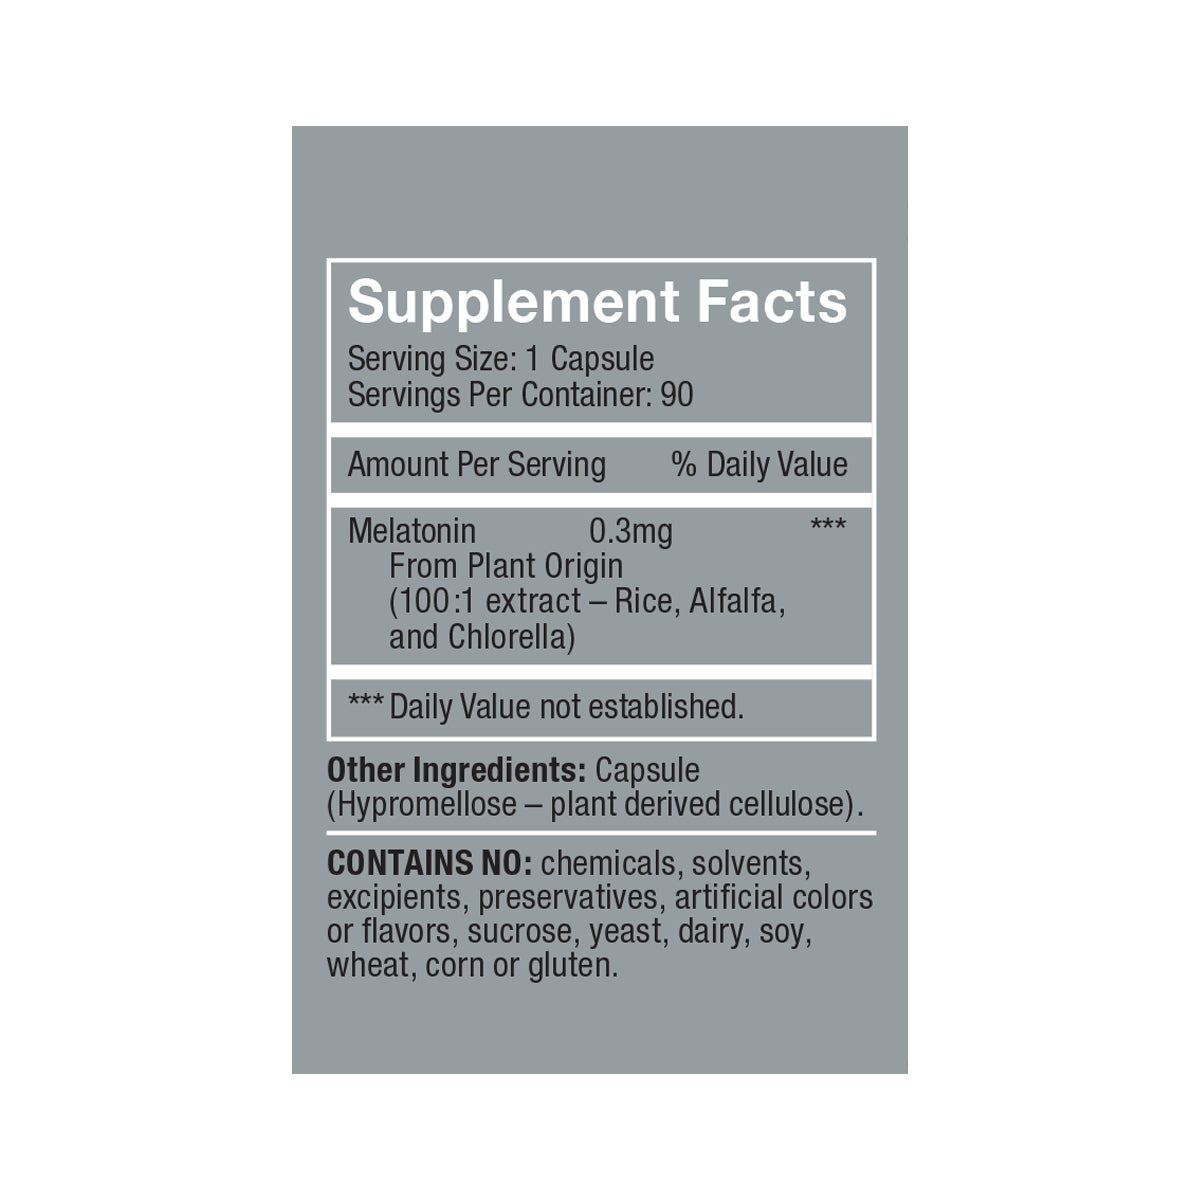 Herbatonin 0.3mg<br>2-Pack side panel product box supplement facts, white/black text on dark gray background: Serving size 1 capsule, servings per container 90, melatonin 0.3mg from plant origin (100:1 extract rice, alfalfa, and chlorella), other ingredient is capsule (hypromellose-plant derived cellulose), contains no chemicals, solvents, excipients, preservatives, artificial colors or flavors, sucrose, yeast, dairy, soy, wheat, corn or gluten